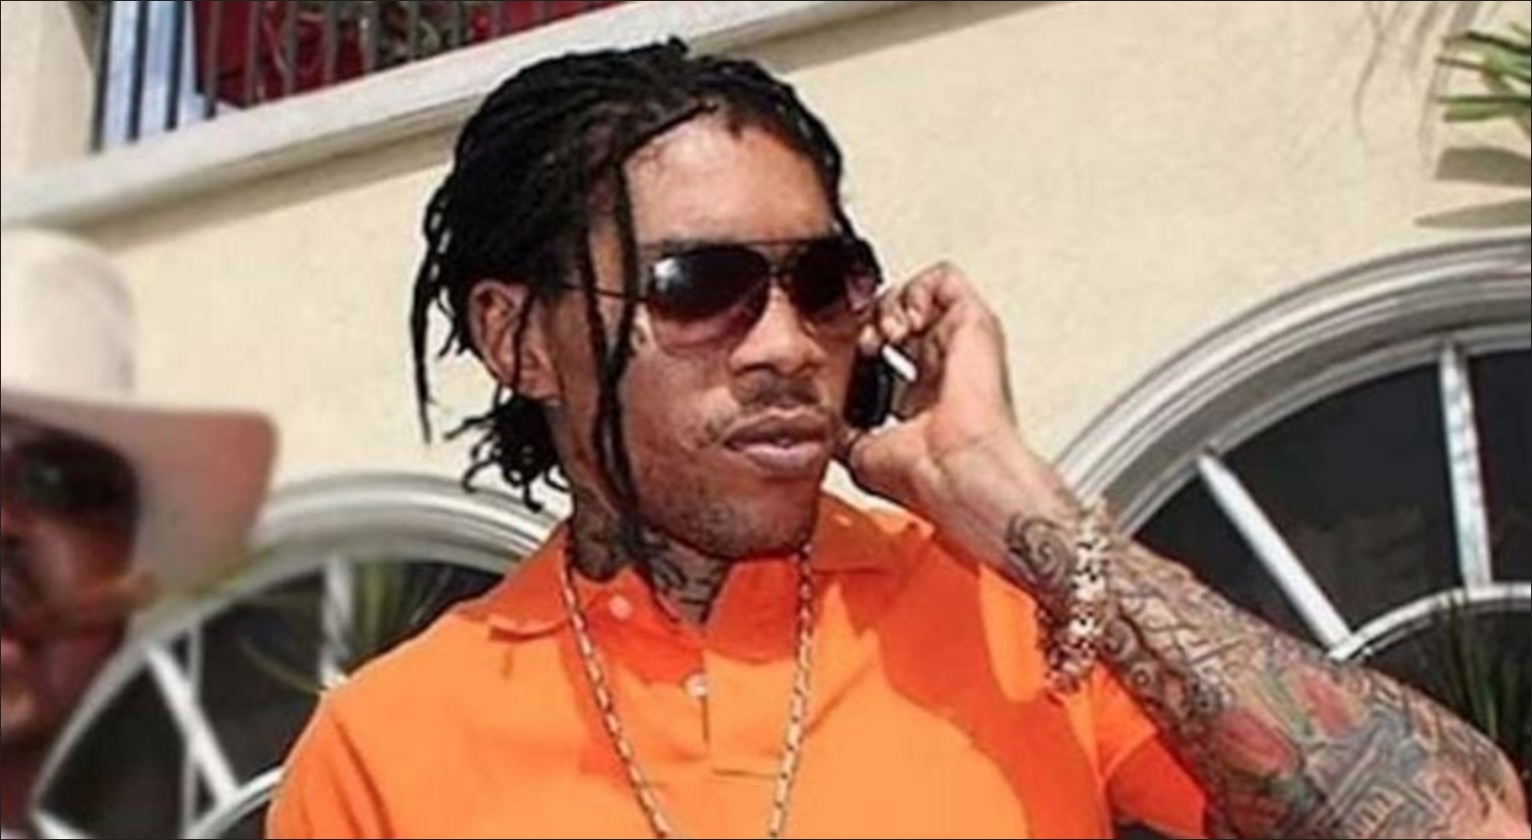 Expect An Update On Vybz Kartel’s Case Tonight On Fox 5 New York According to Reports – YARDHYPE